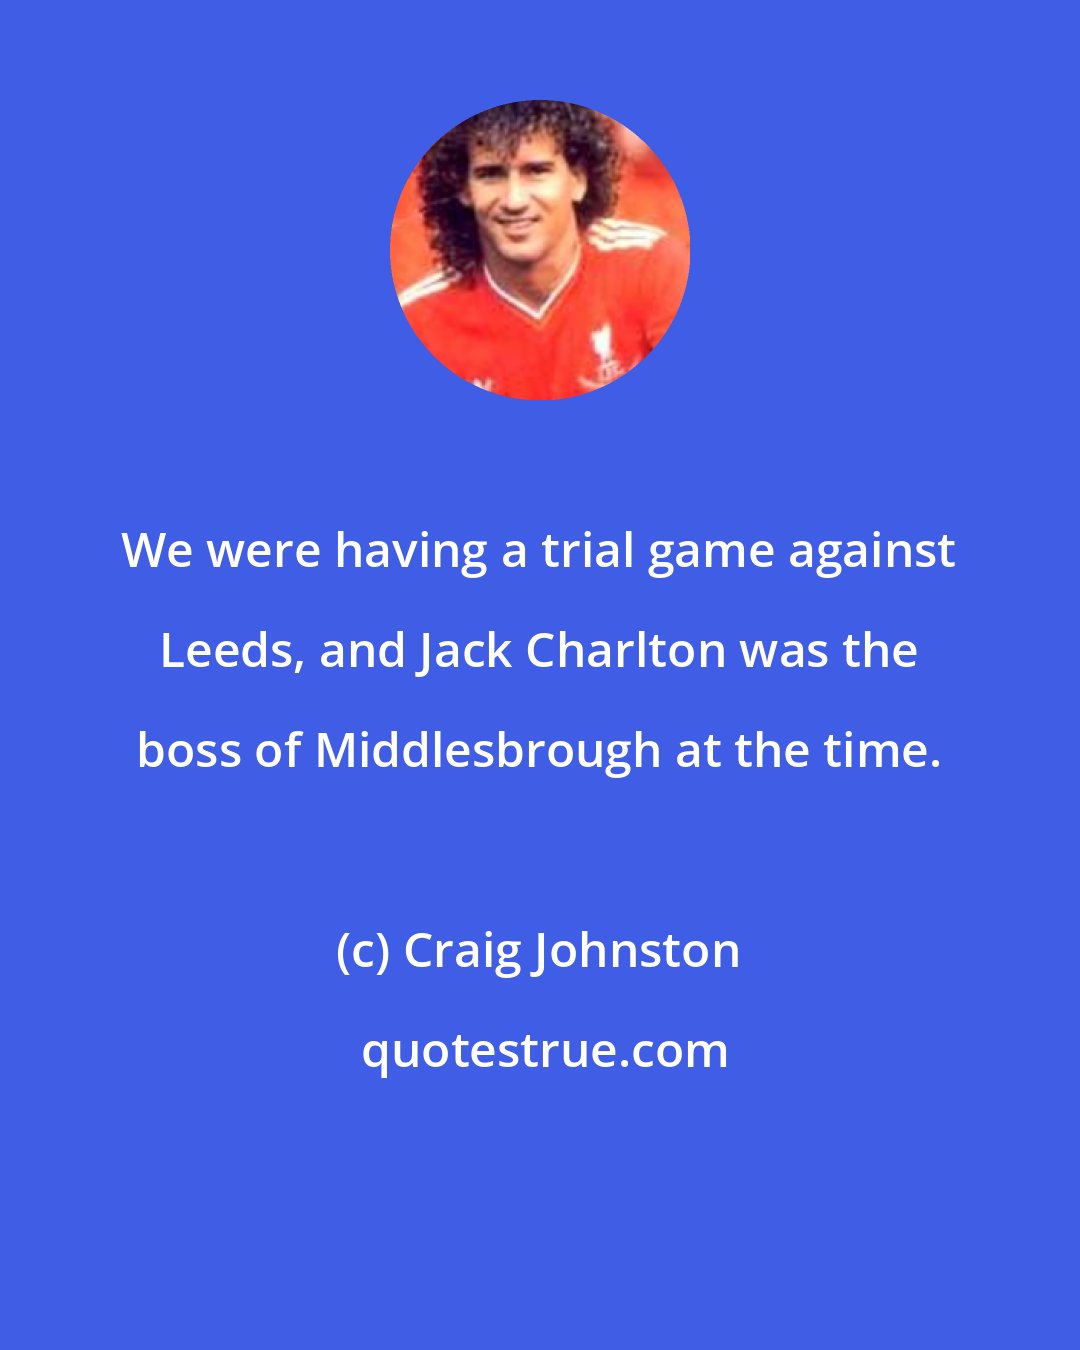 Craig Johnston: We were having a trial game against Leeds, and Jack Charlton was the boss of Middlesbrough at the time.